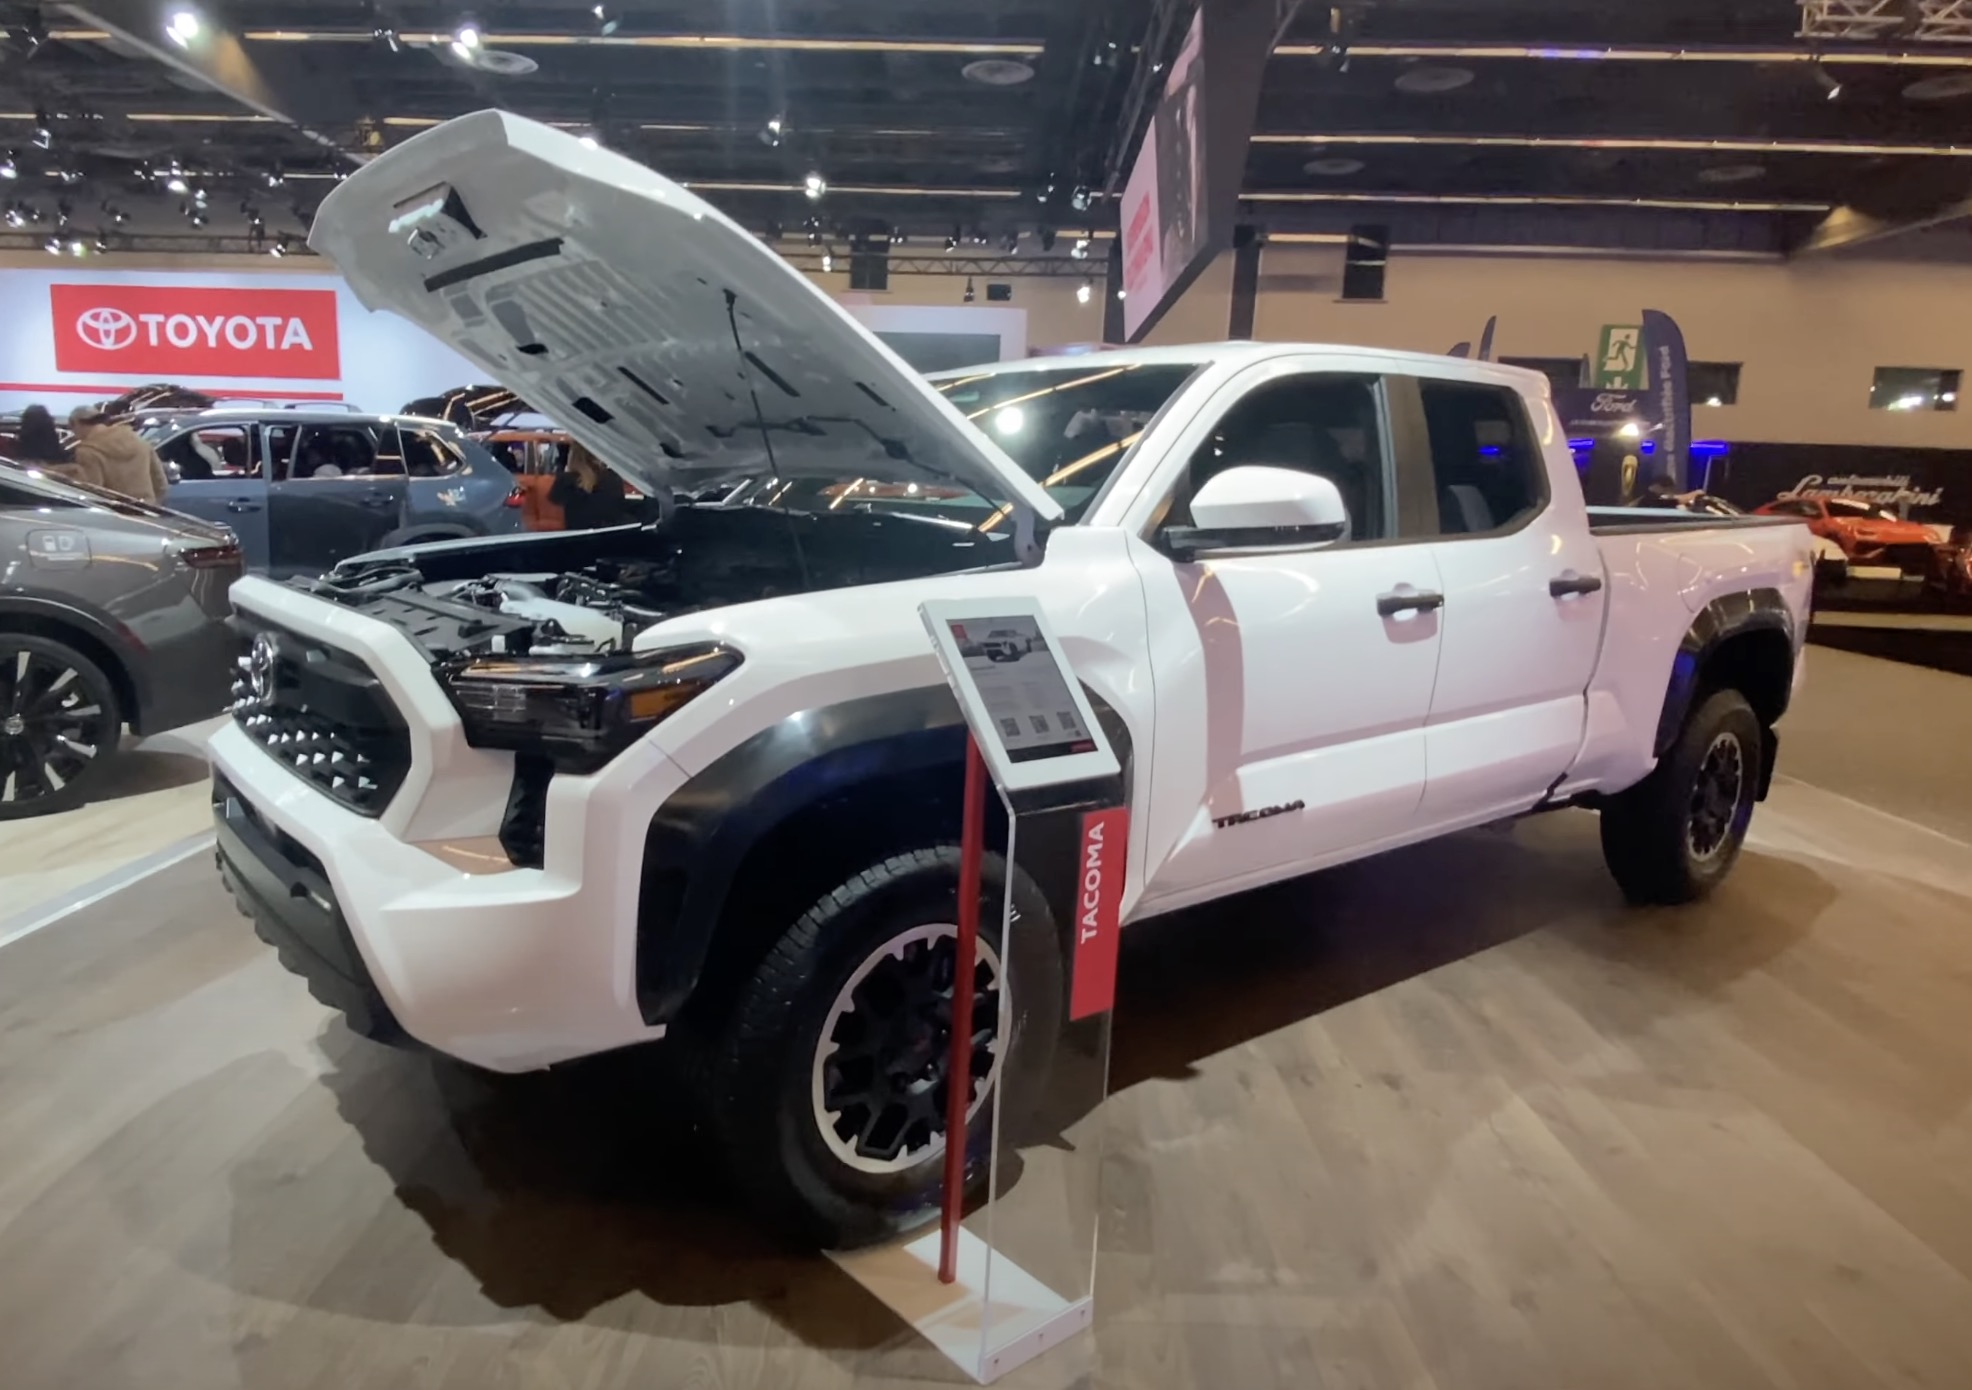 2024 Tacoma 2024 Tacoma TRD OFF-ROAD Specs, Prices, Features & Photos Ice Cap White 2024 Tacoma TRD Off-Road Model